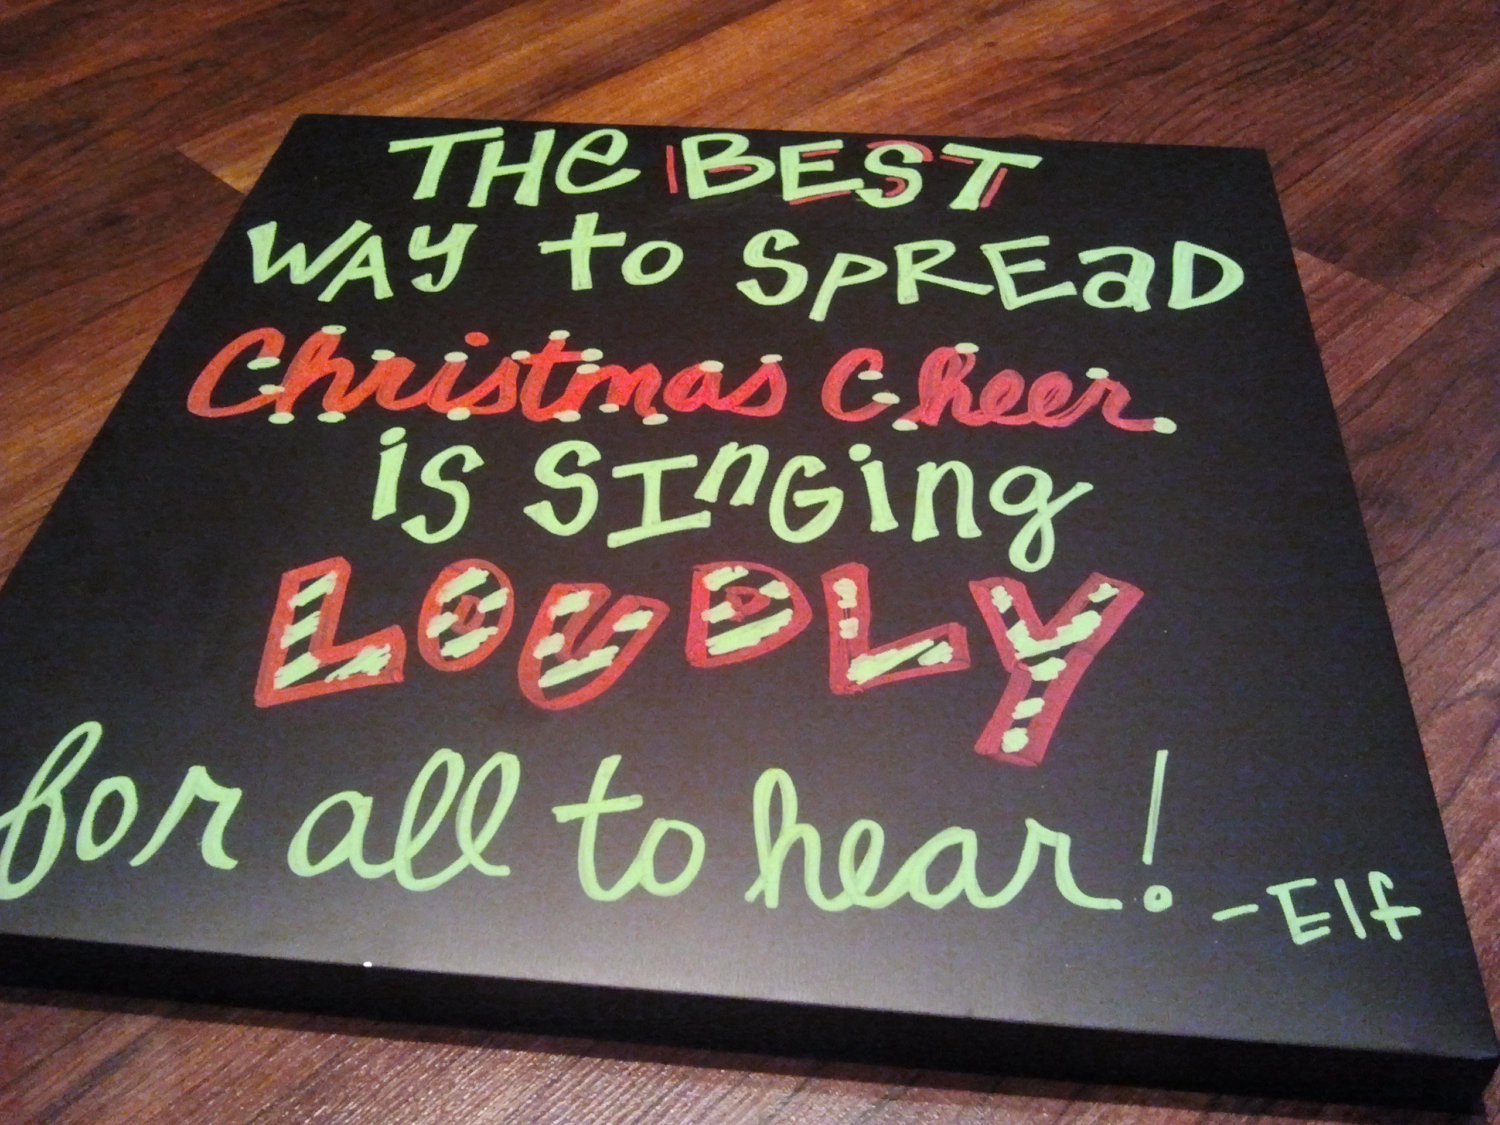 Christmas Cheer Quotes
 Holiday Cheer Quotes QuotesGram